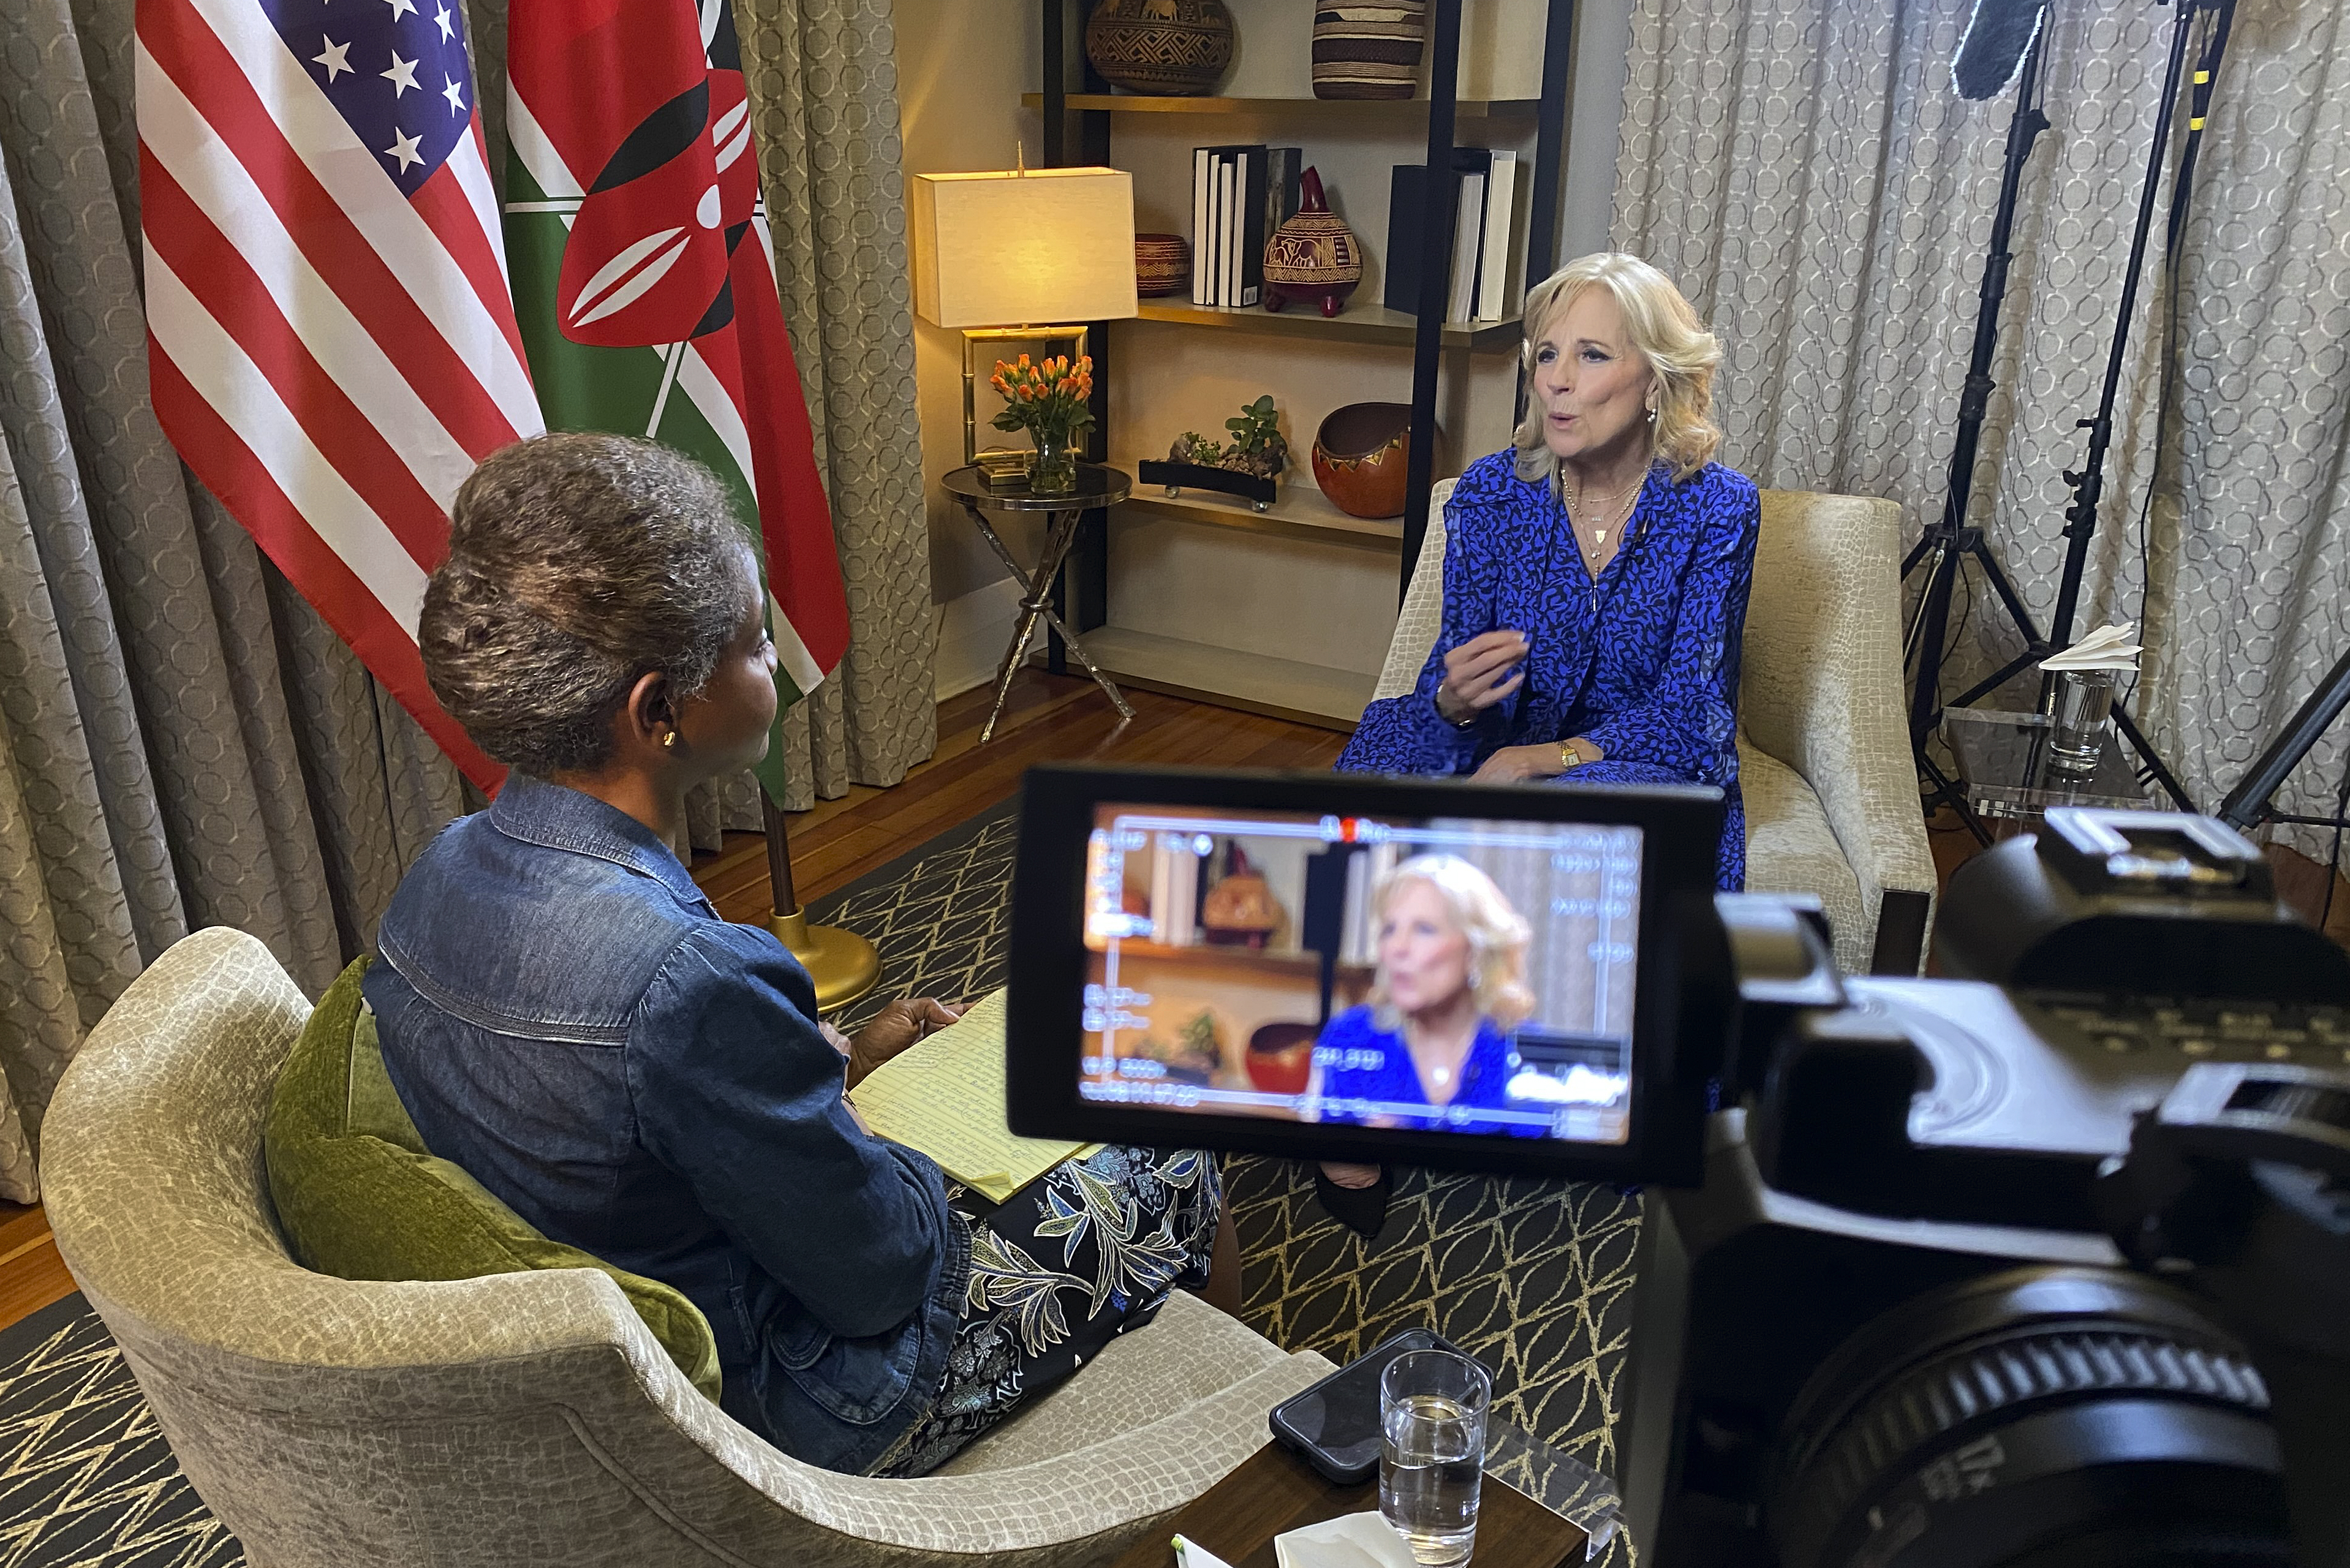 In an interview conducted by The Associated Press news agency, First Lady Jill Biden ruled out having the final vote on Biden's decision to seek re-election.  (AP)